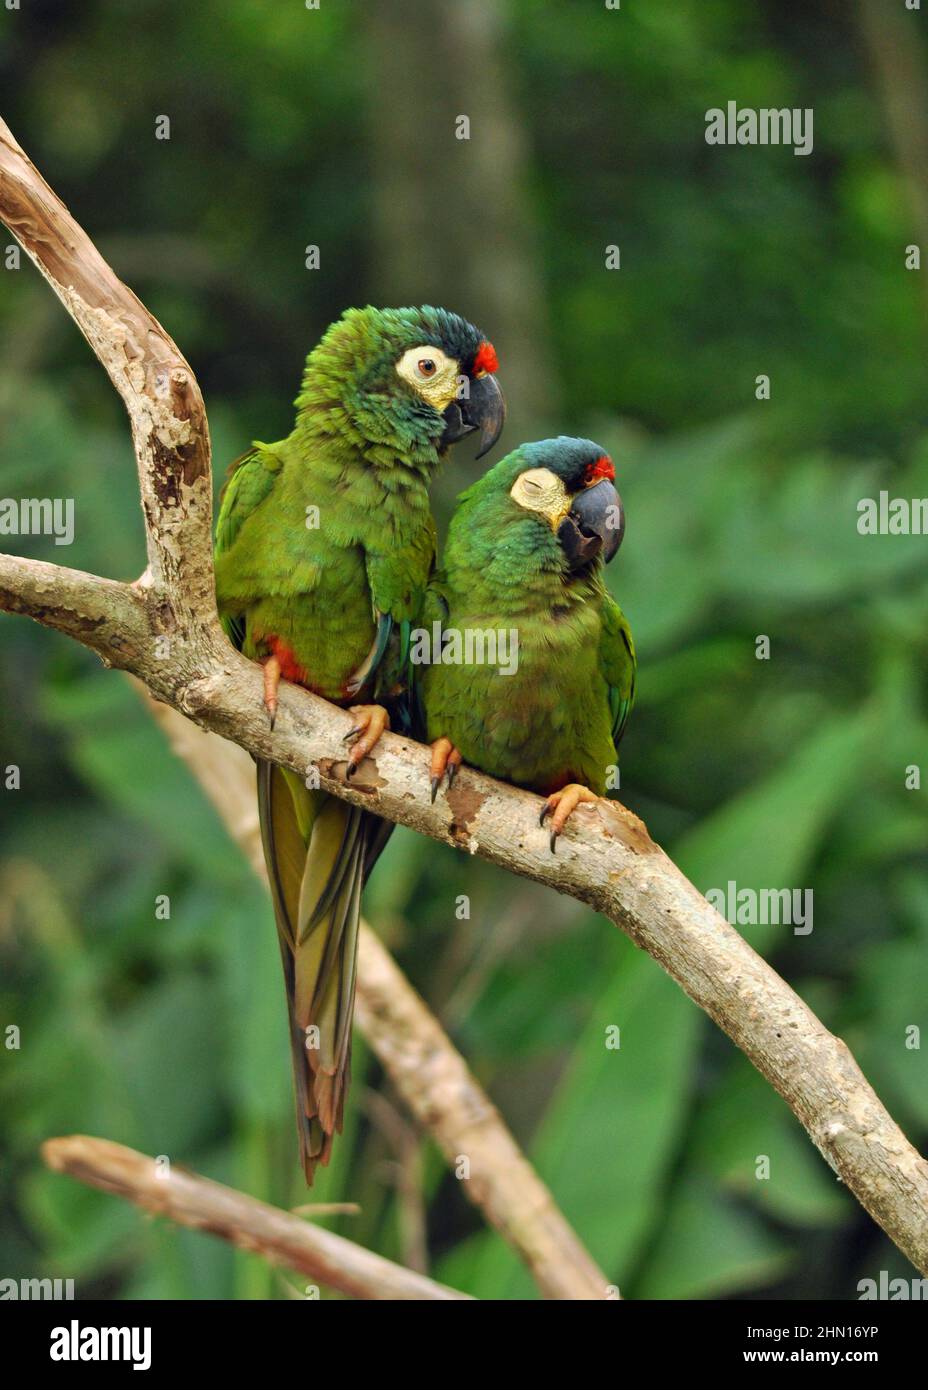 Pair of Blue-winged macaw (Primolius maracana) more commonly known as Illigers macaw, perched on a branch. Taken at Parque des aves, Brazil. Stock Photo